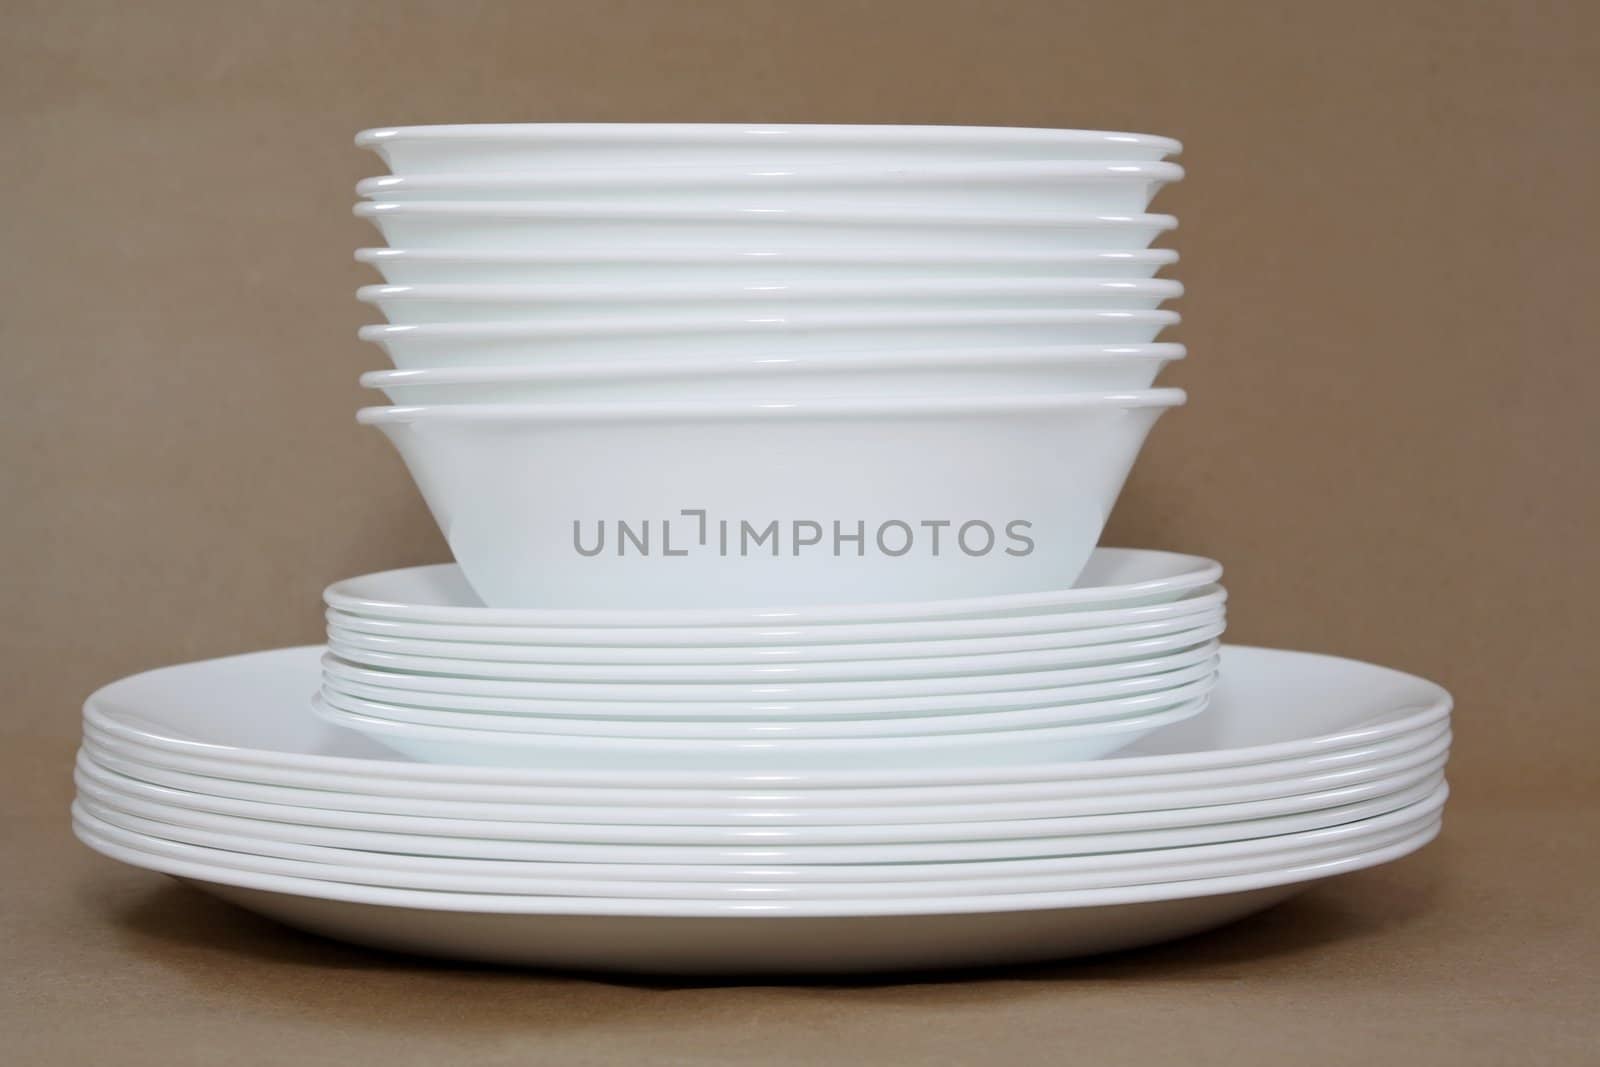 white dishes stacked, brown background